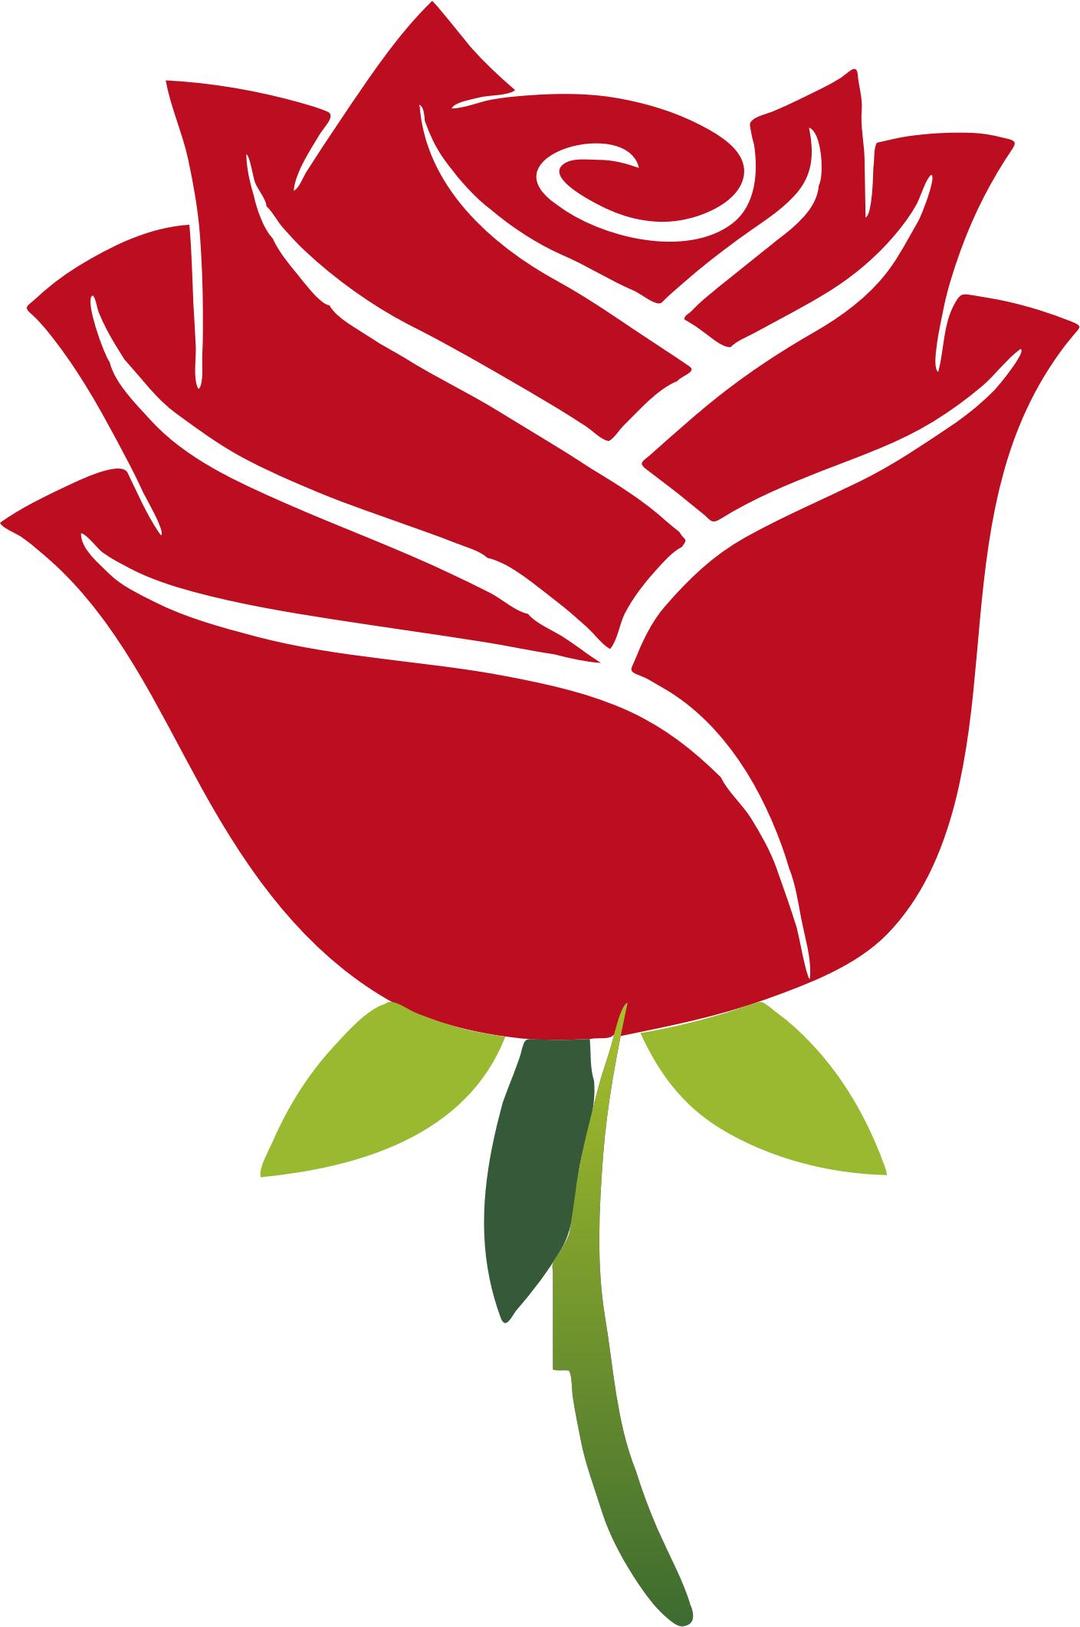 Stylized Rose No Drop Shadow png transparent